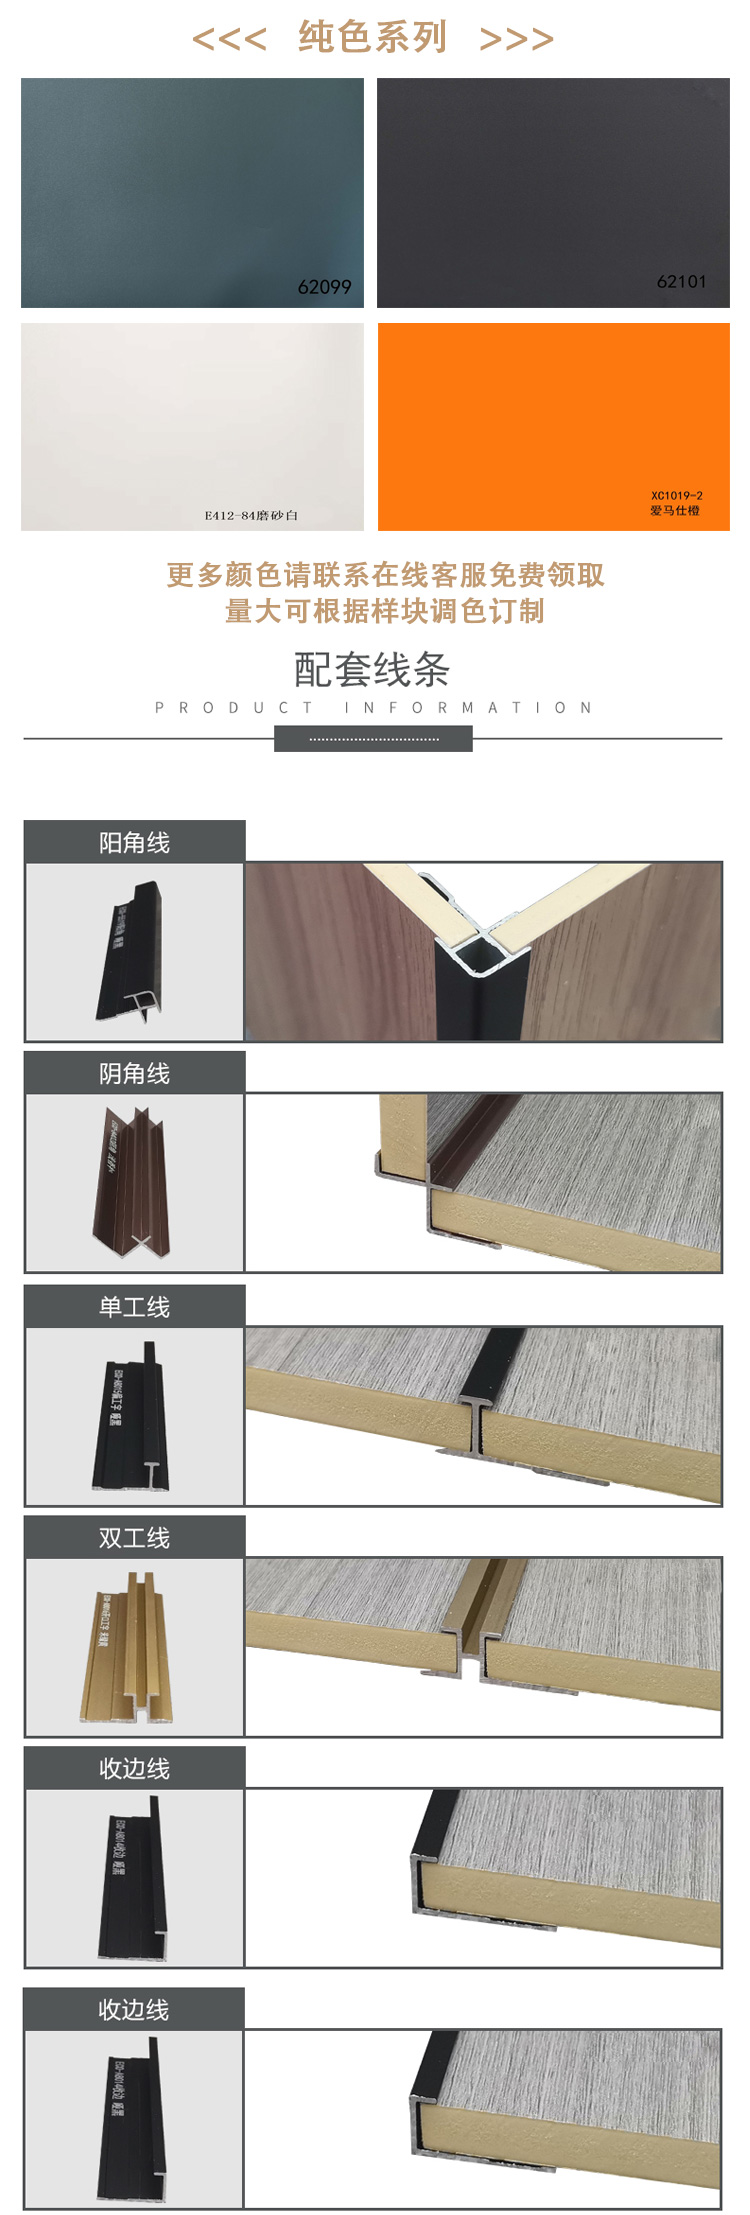 Fireproof and moisture-proof wooden decorative panels, hotel home decoration, work equipment, wall protection panels, bedroom decorative panels